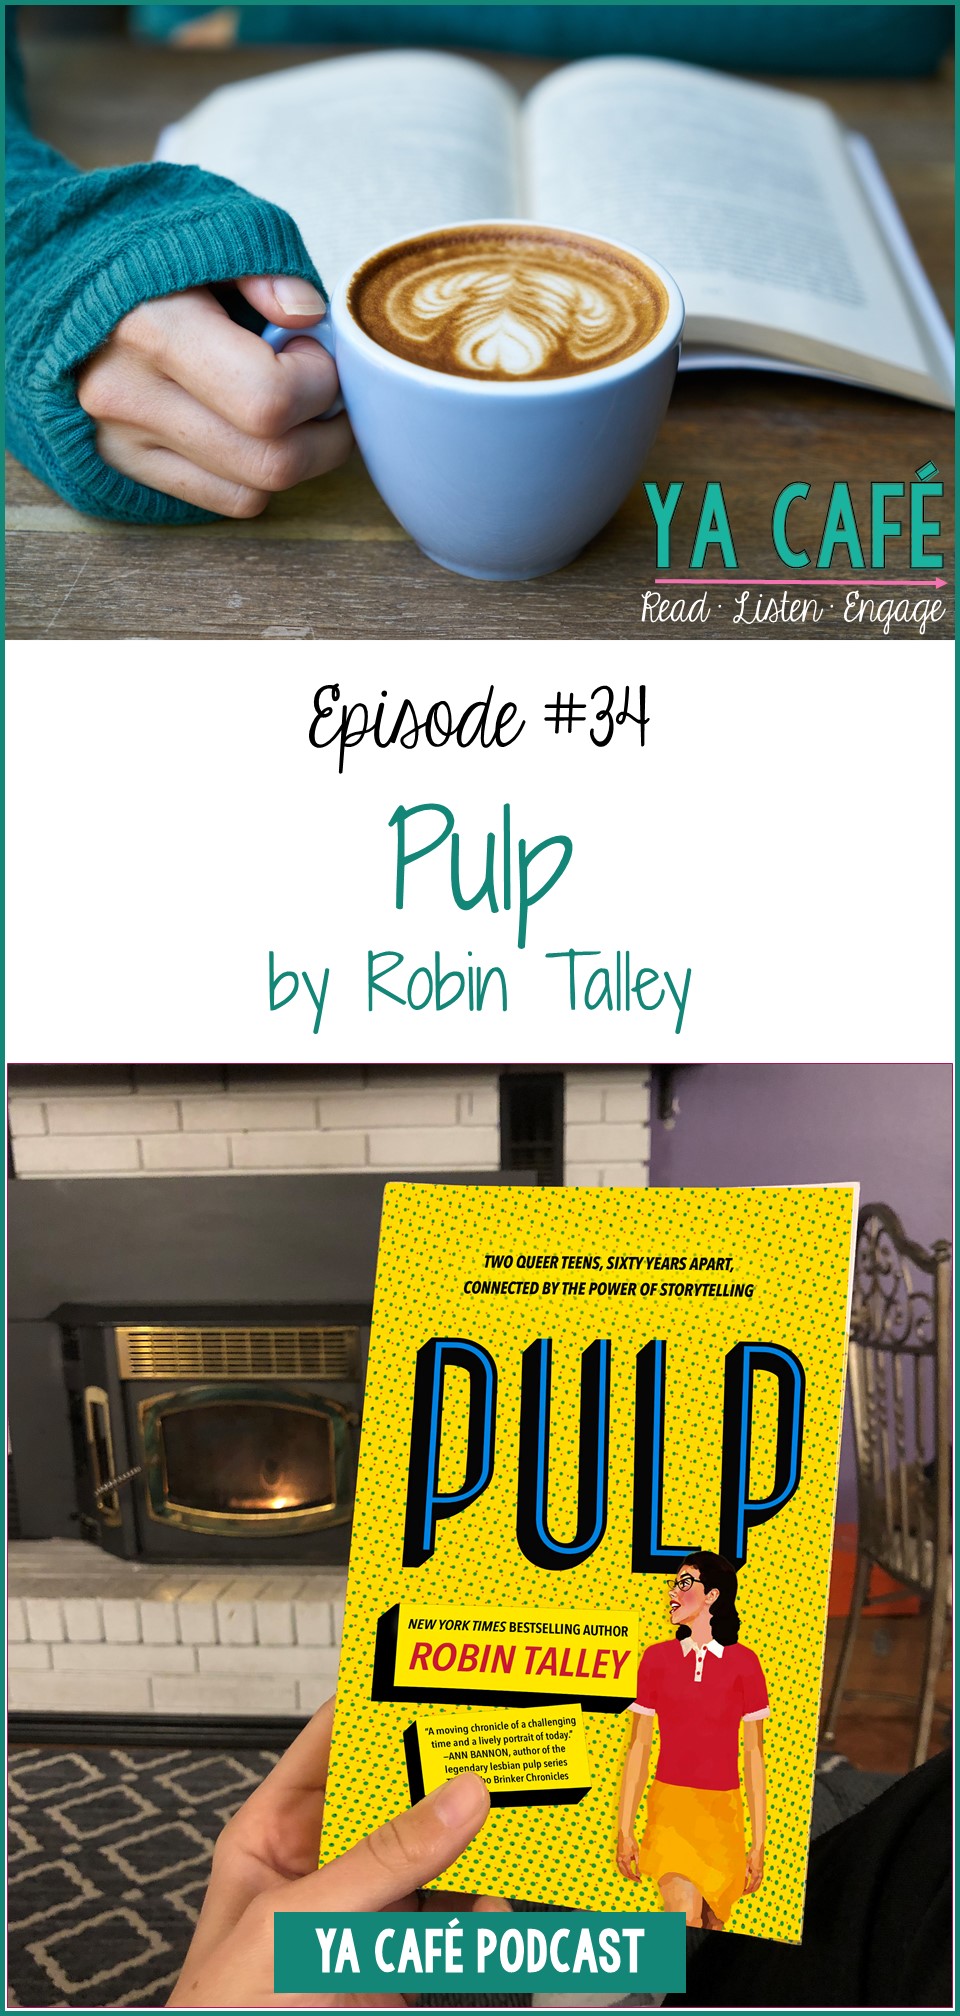 Pulp by Robin Talley